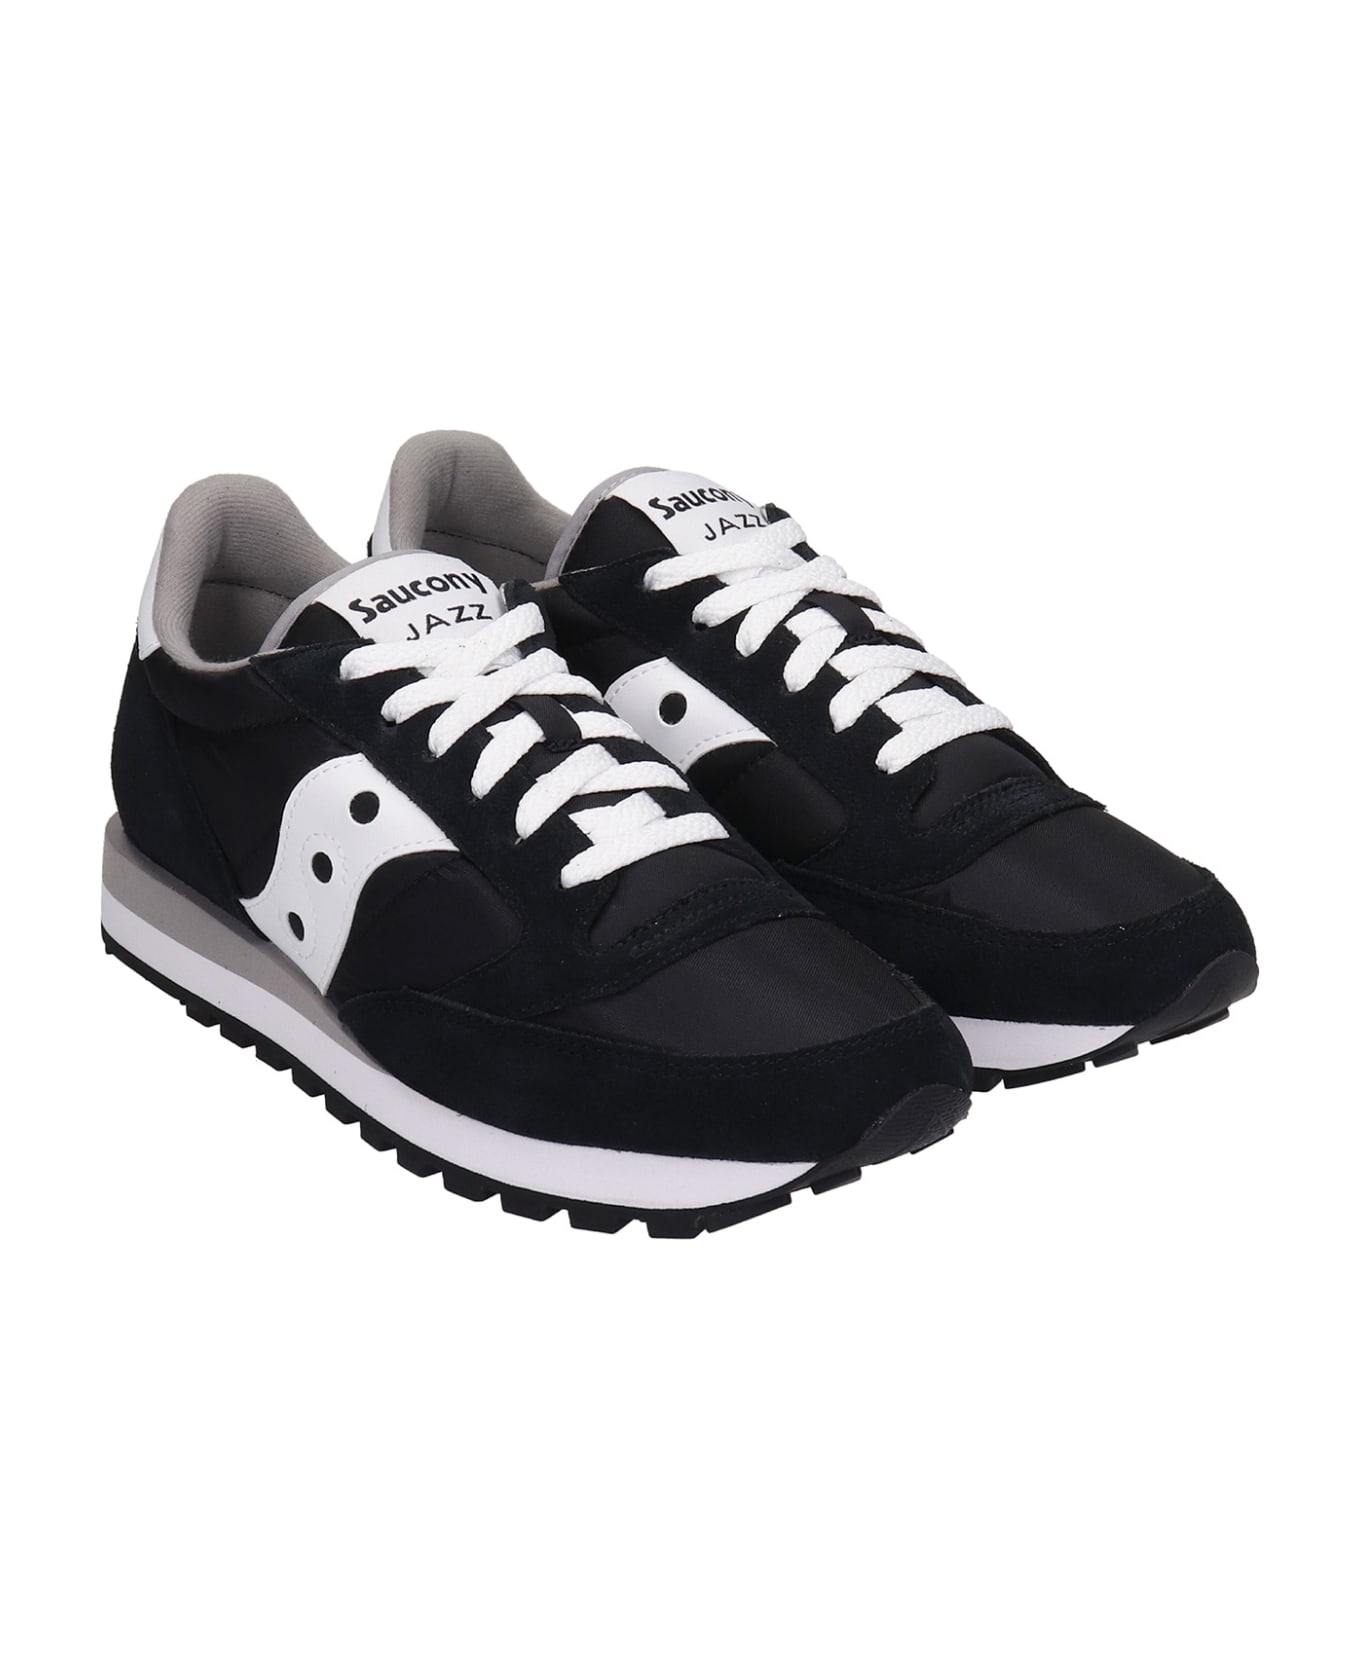 Saucony Jazz Original Sneakers In Black Suede And Fabric - Blk/wht スニーカー